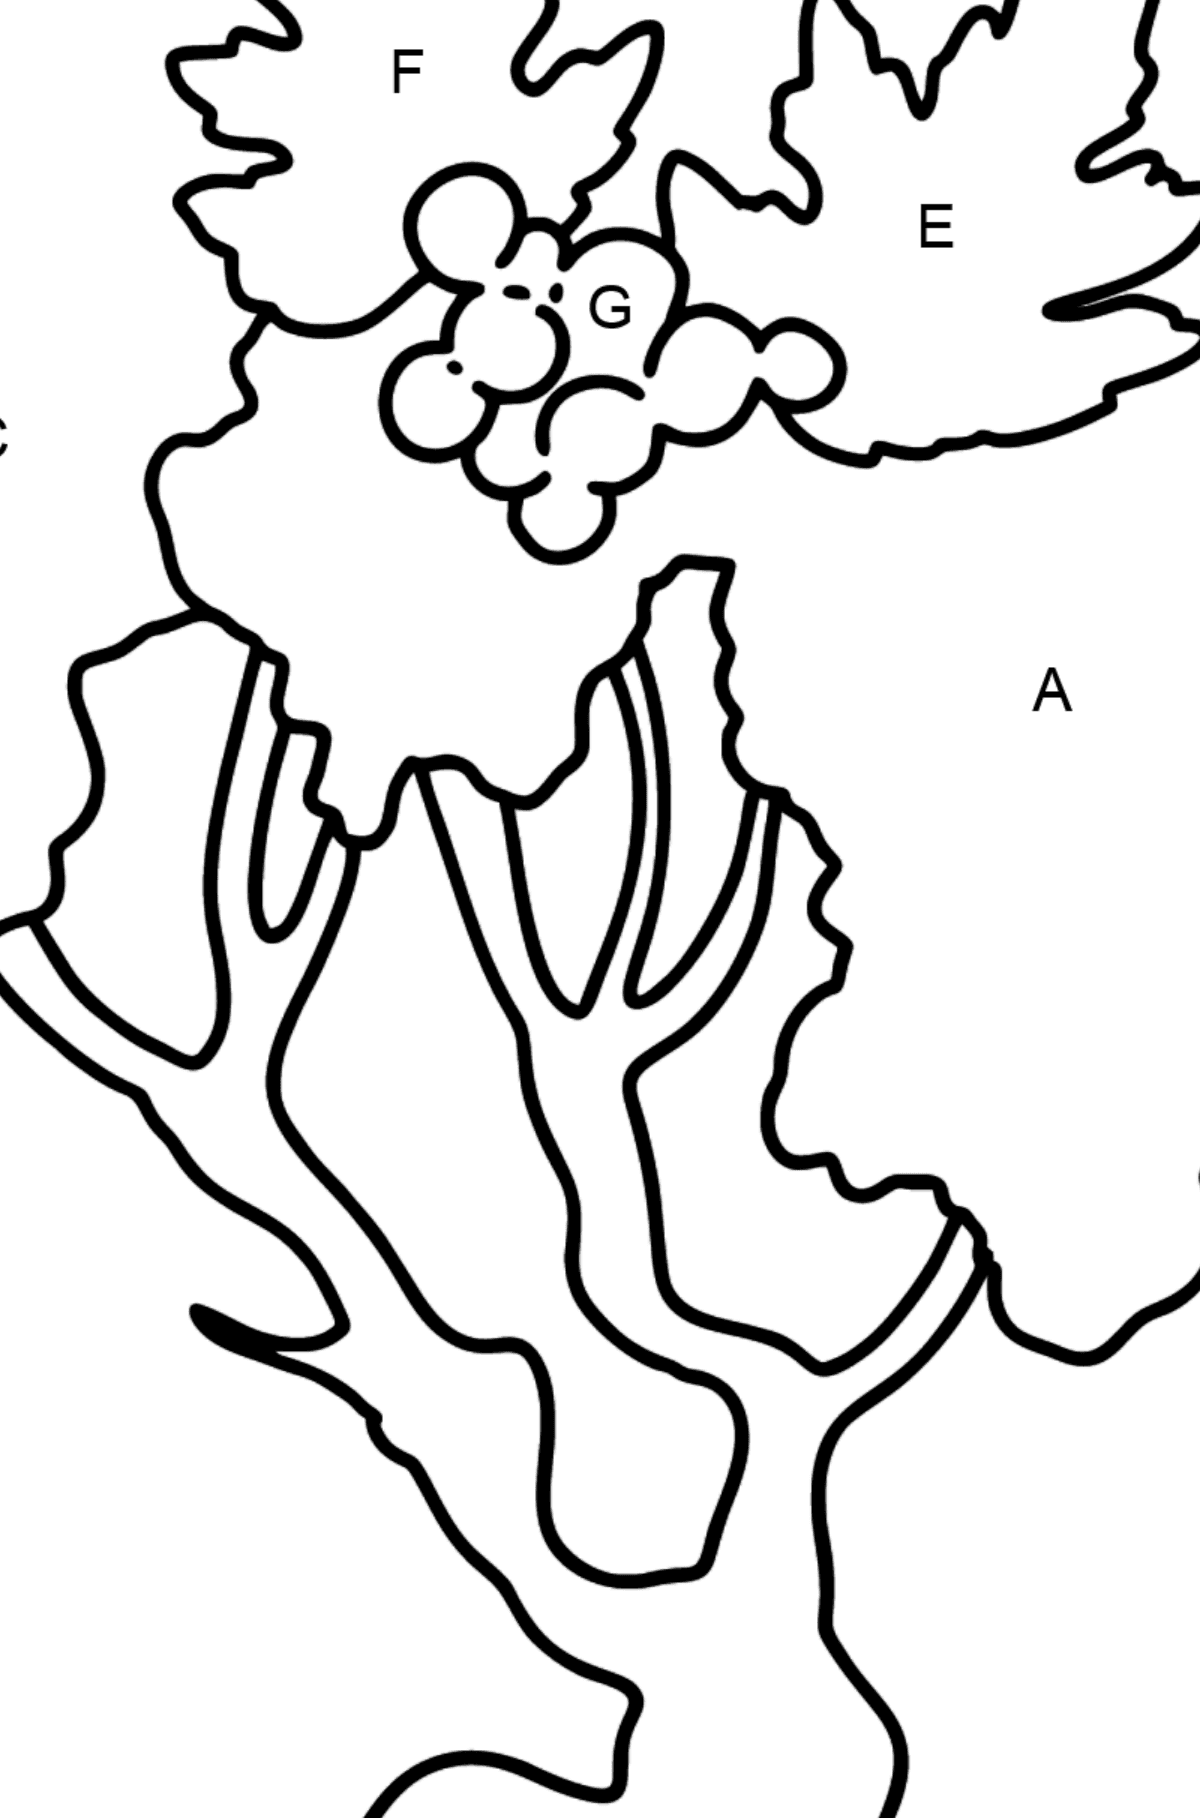 Hawthorn coloring page - Coloring by Letters for Kids